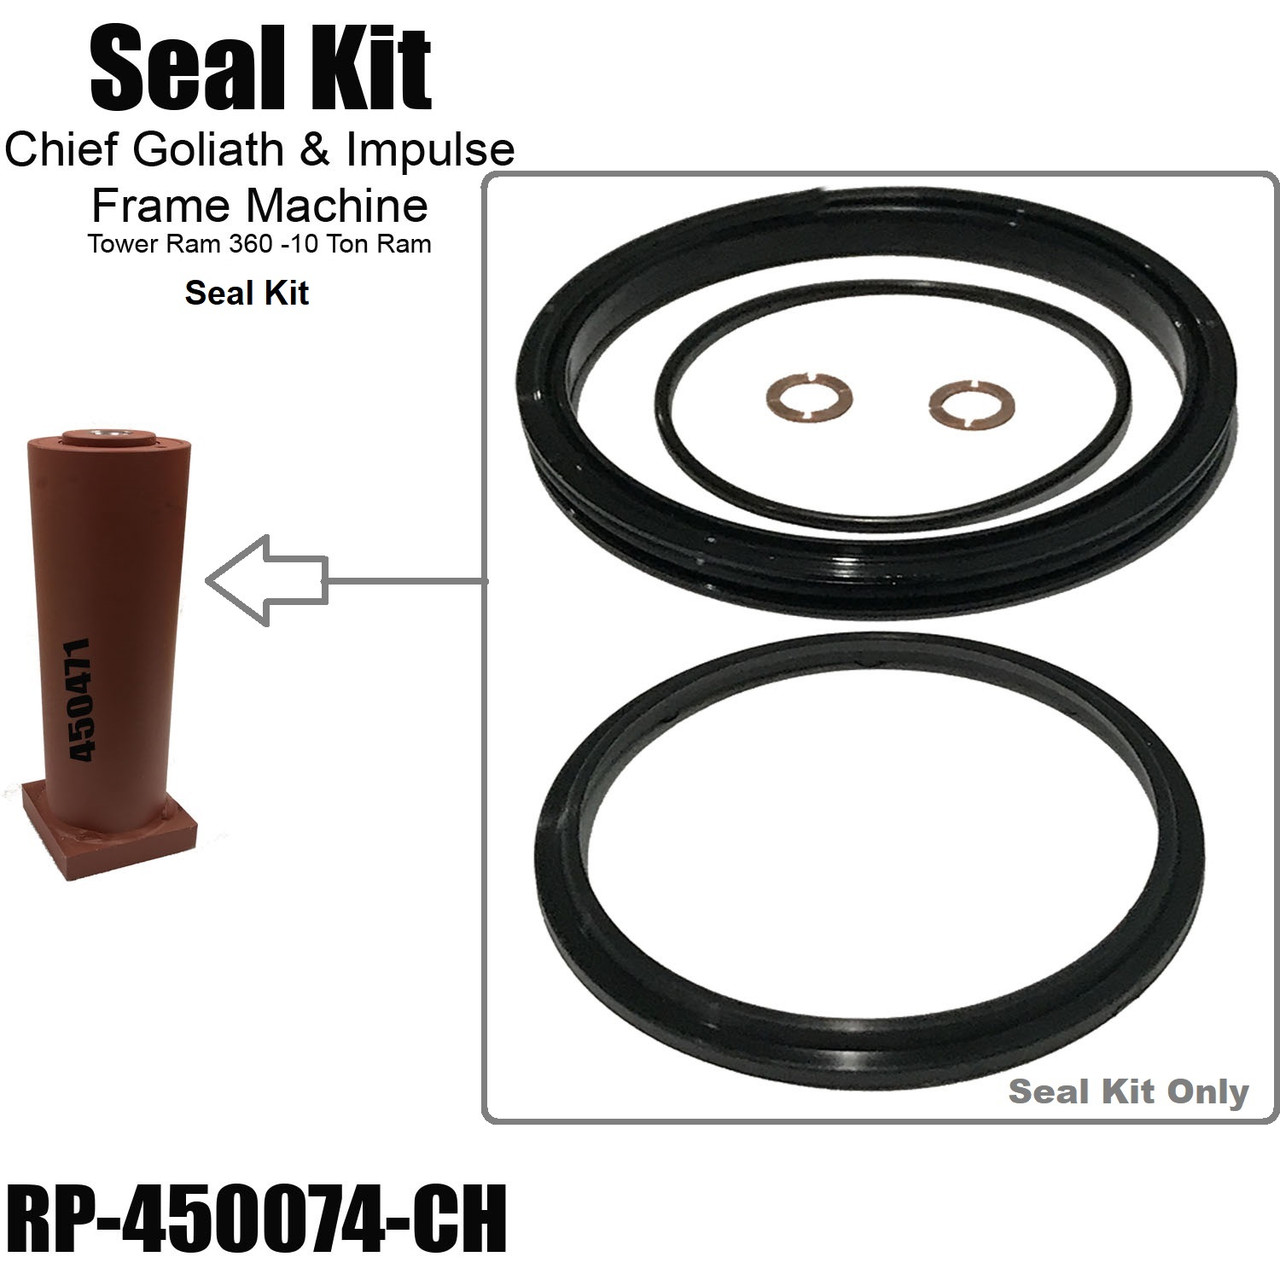 Replacement Chief Goliath - Impulse Tower Ram Seal Kit